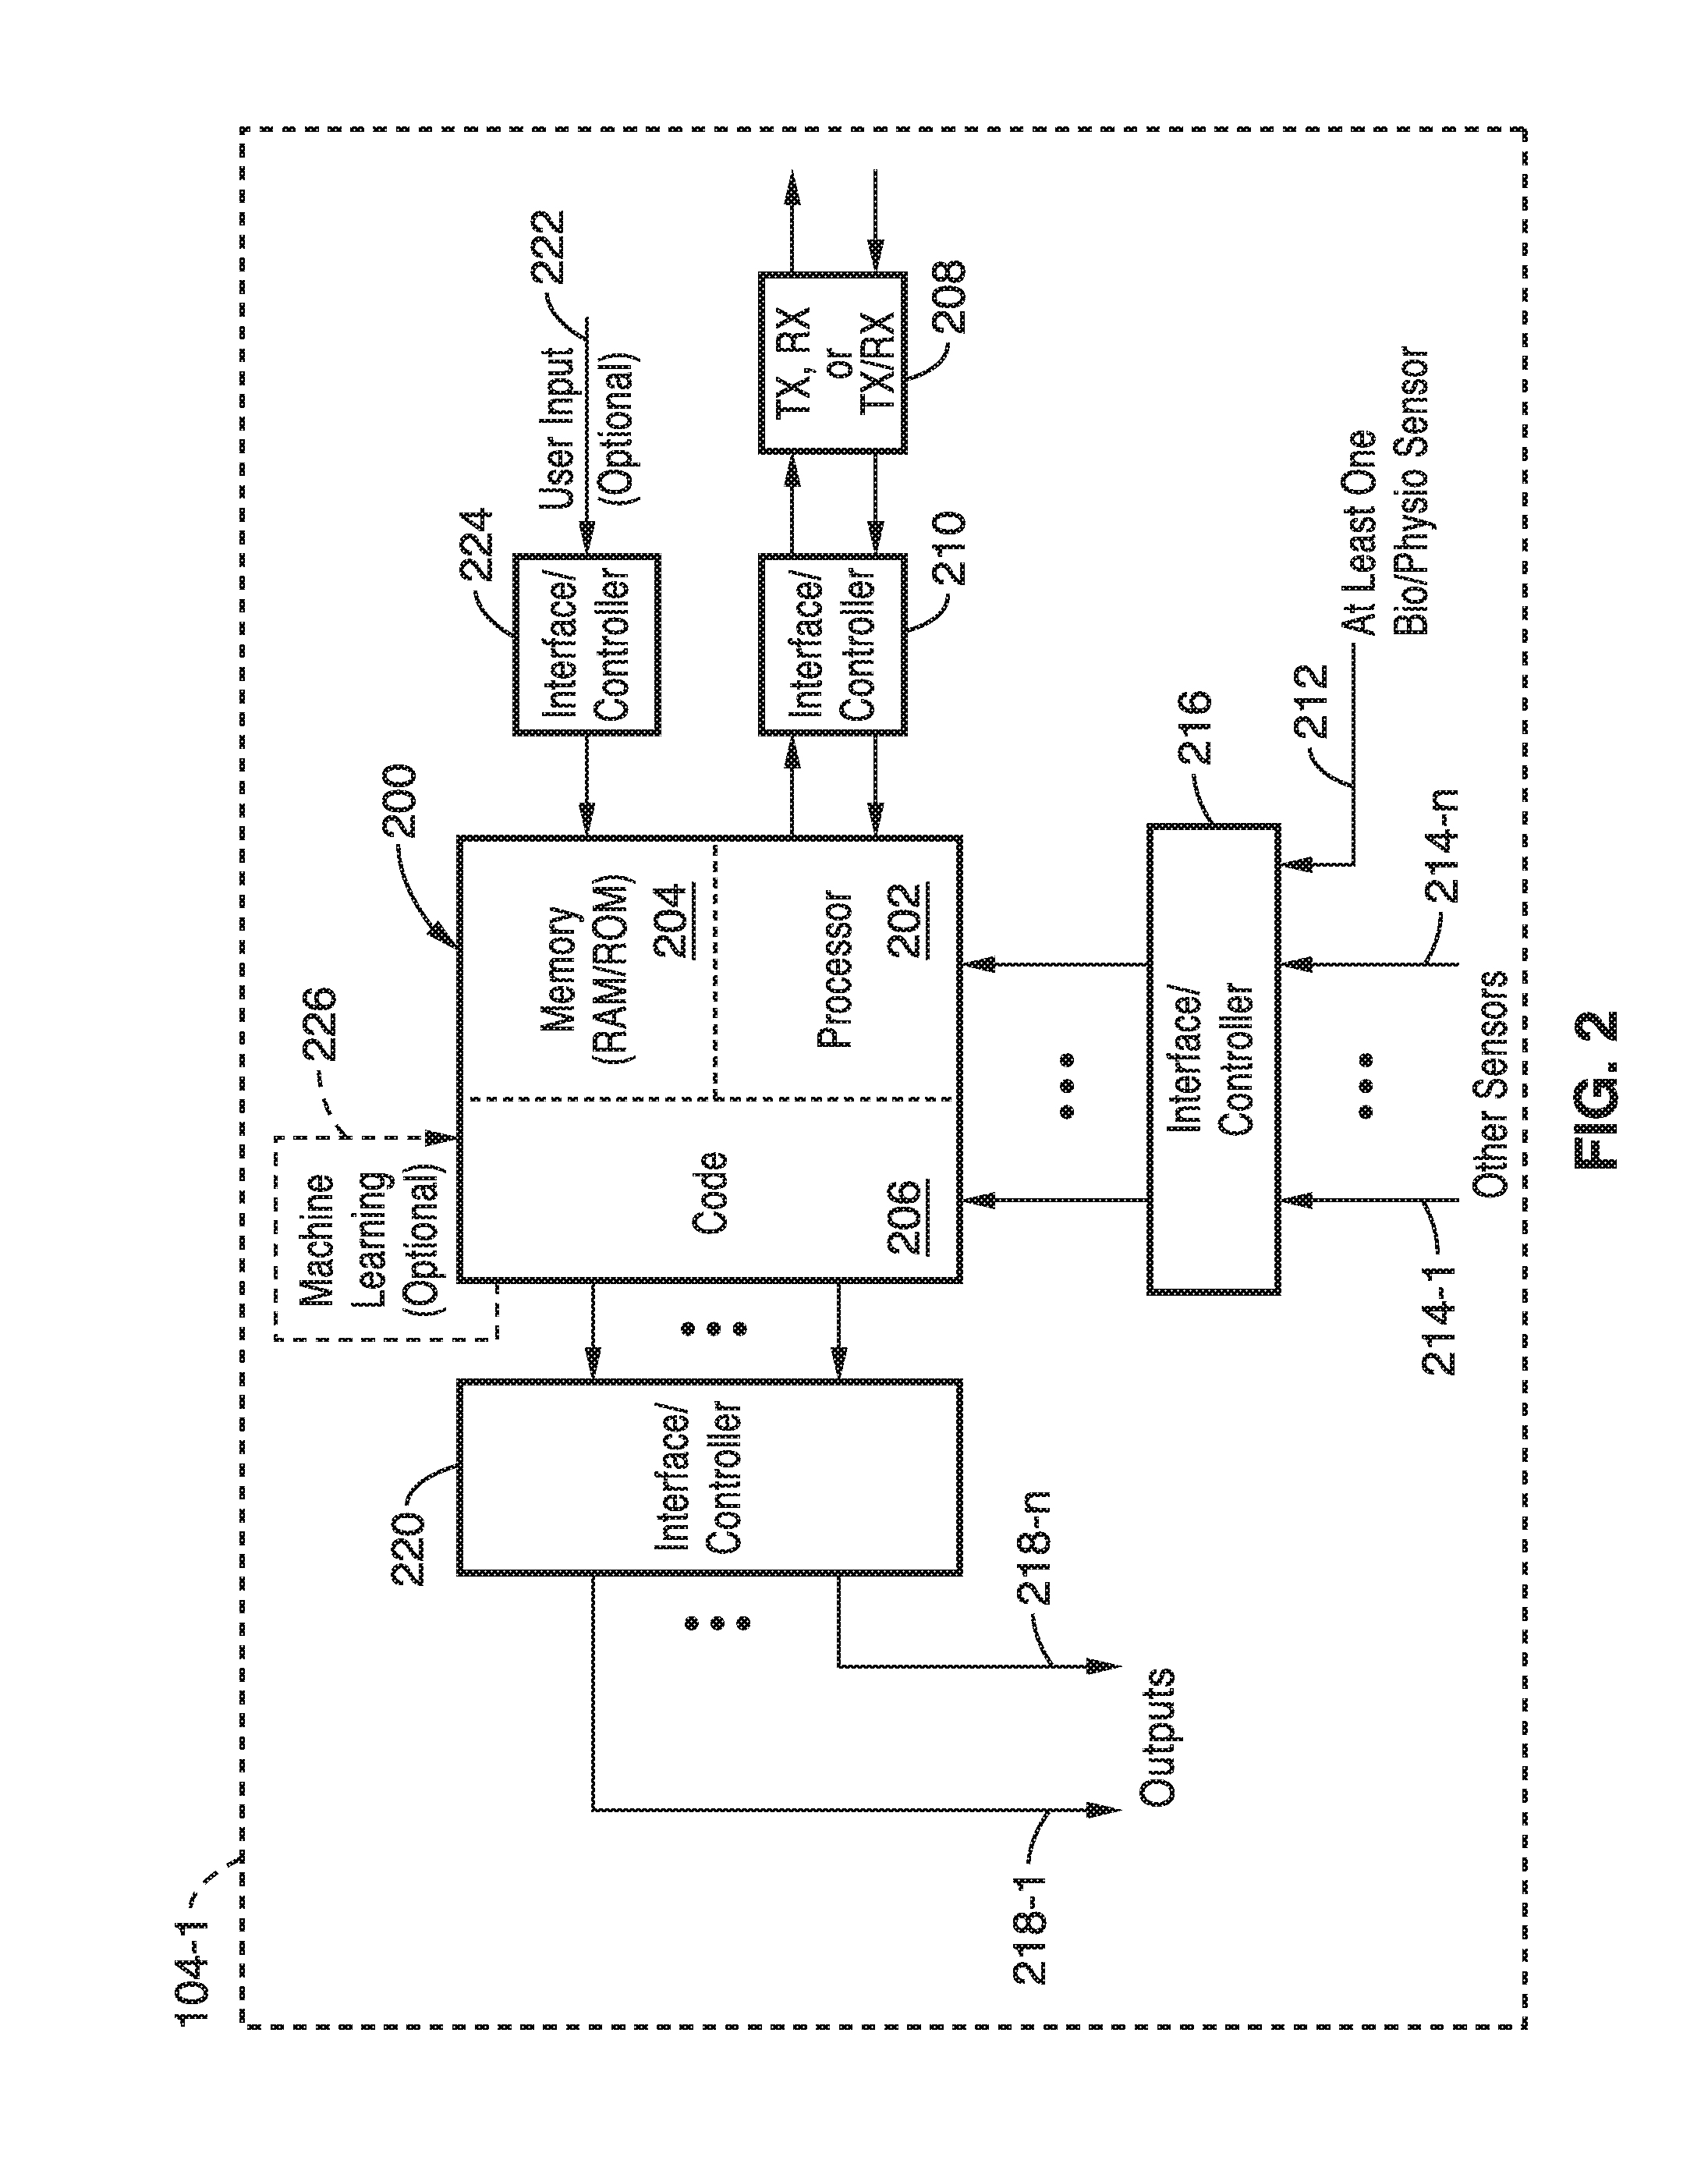 Smart wearable devices and methods for automatically configuring capabilities with biology and environment capture sensors